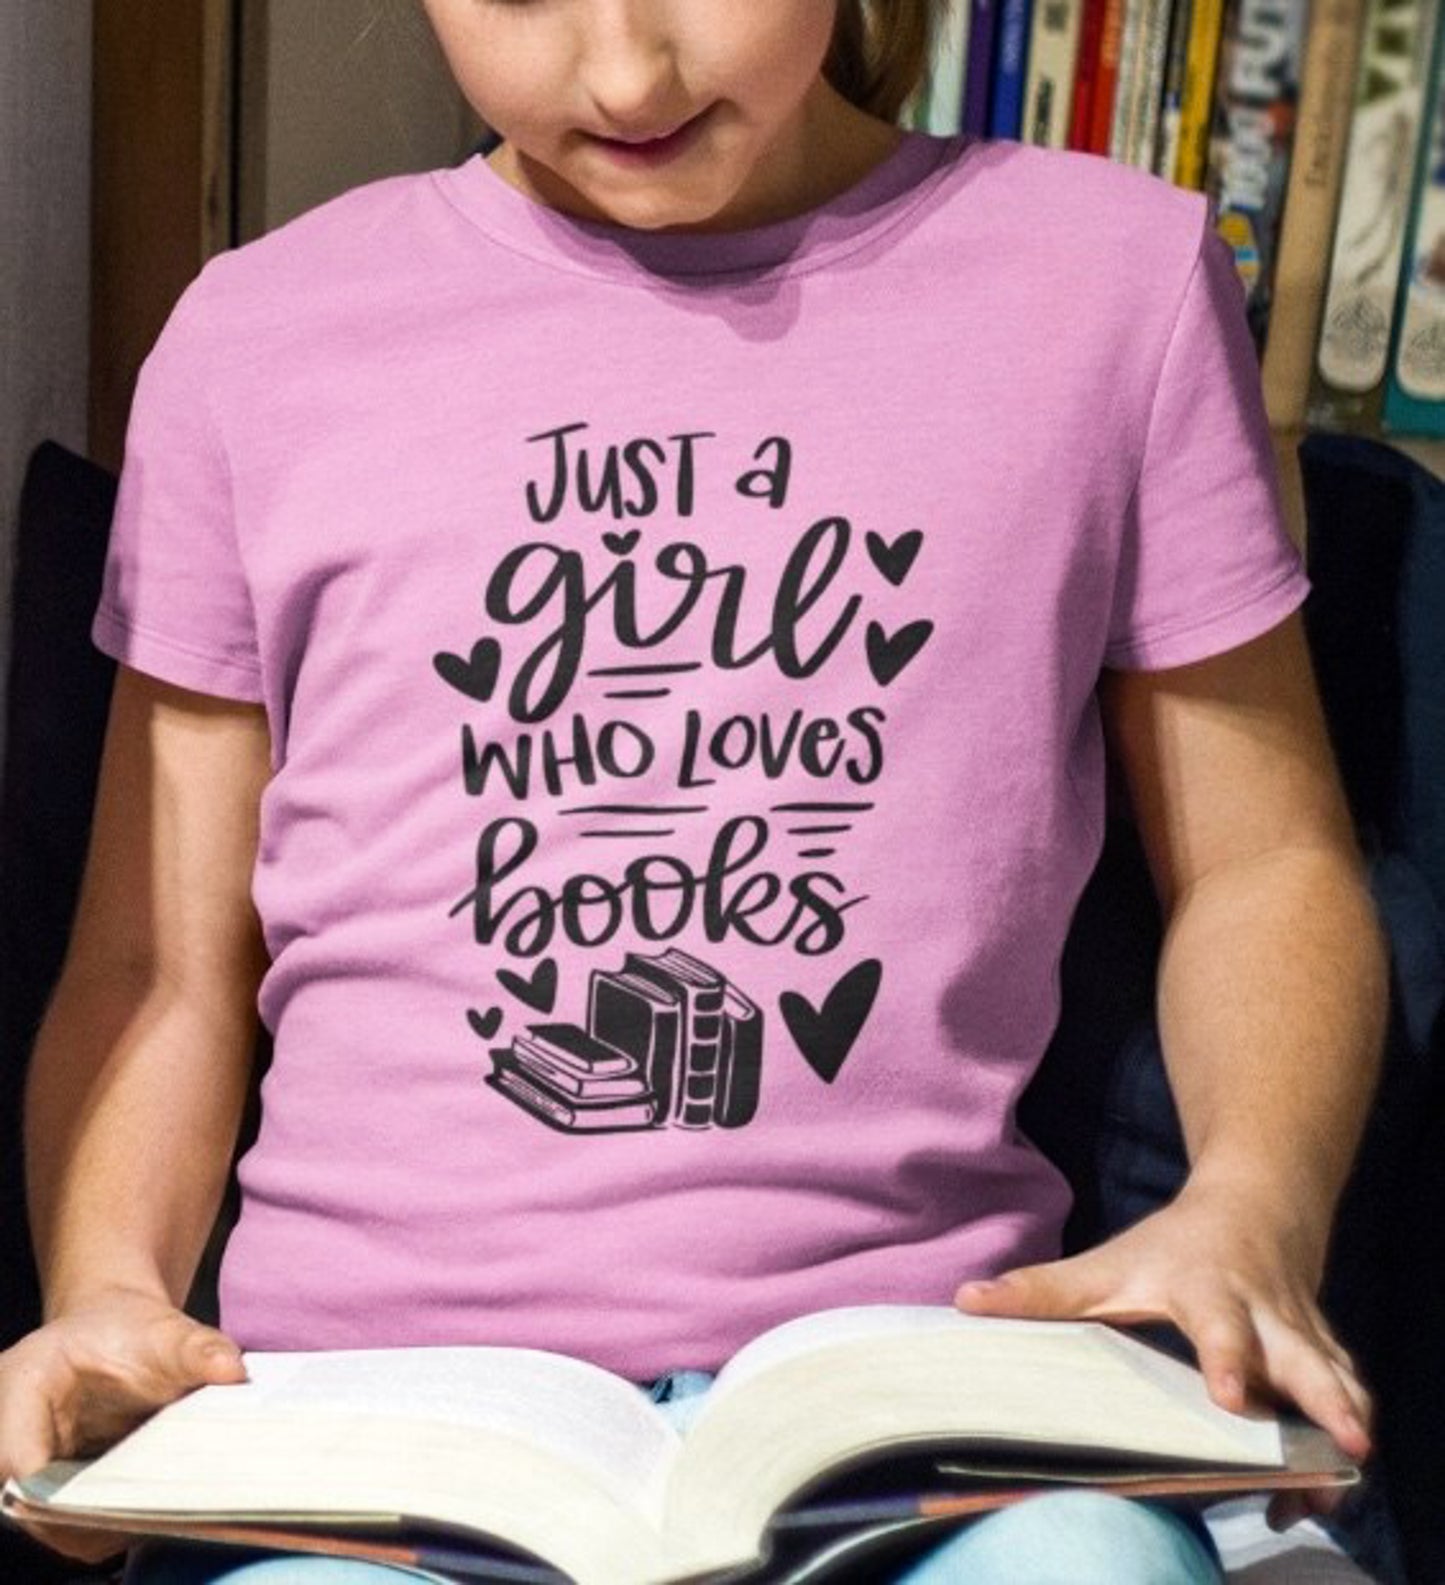 Just A Girl Who Loves Books Tee